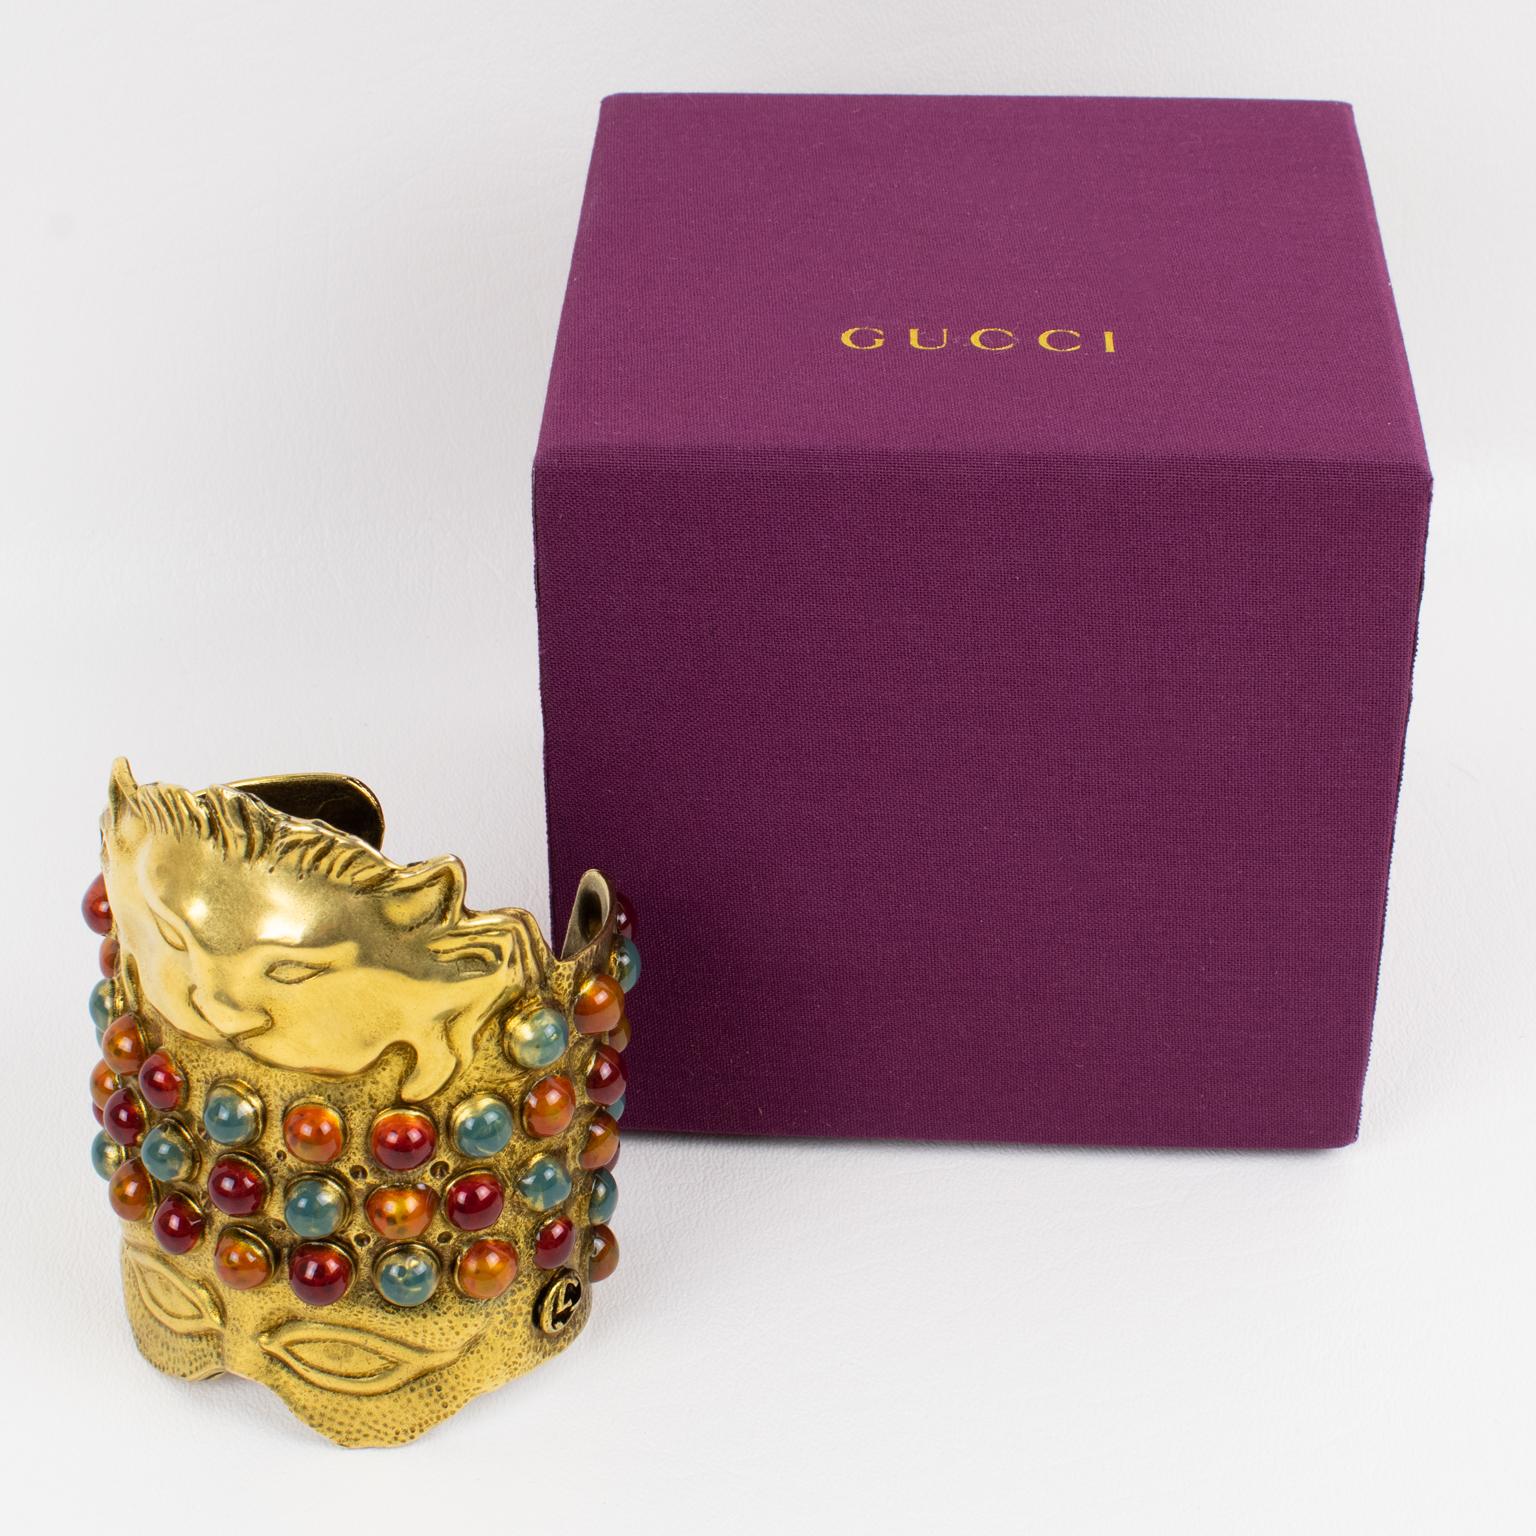 Gucci Italy 2020 Runway Cruise Collection Jeweled Gilt Metal Cuff Bracelet In Excellent Condition For Sale In Atlanta, GA